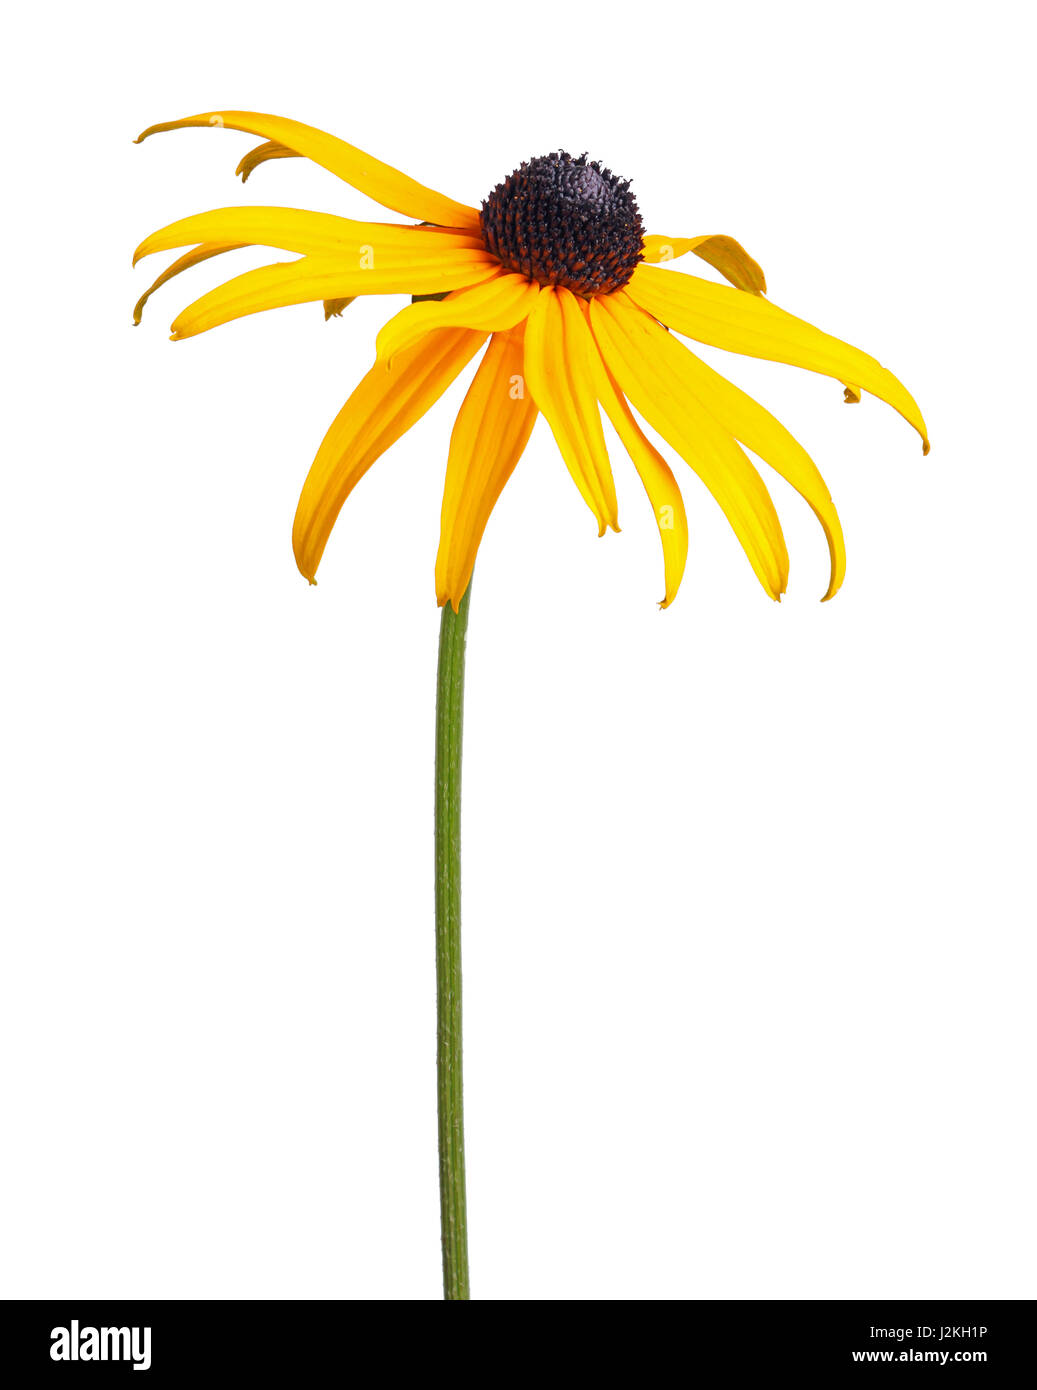 Single compound, yellow and black flower of a brown- or black-eyed Susan (Rudbeckia hirta) isolated against a white background Stock Photo